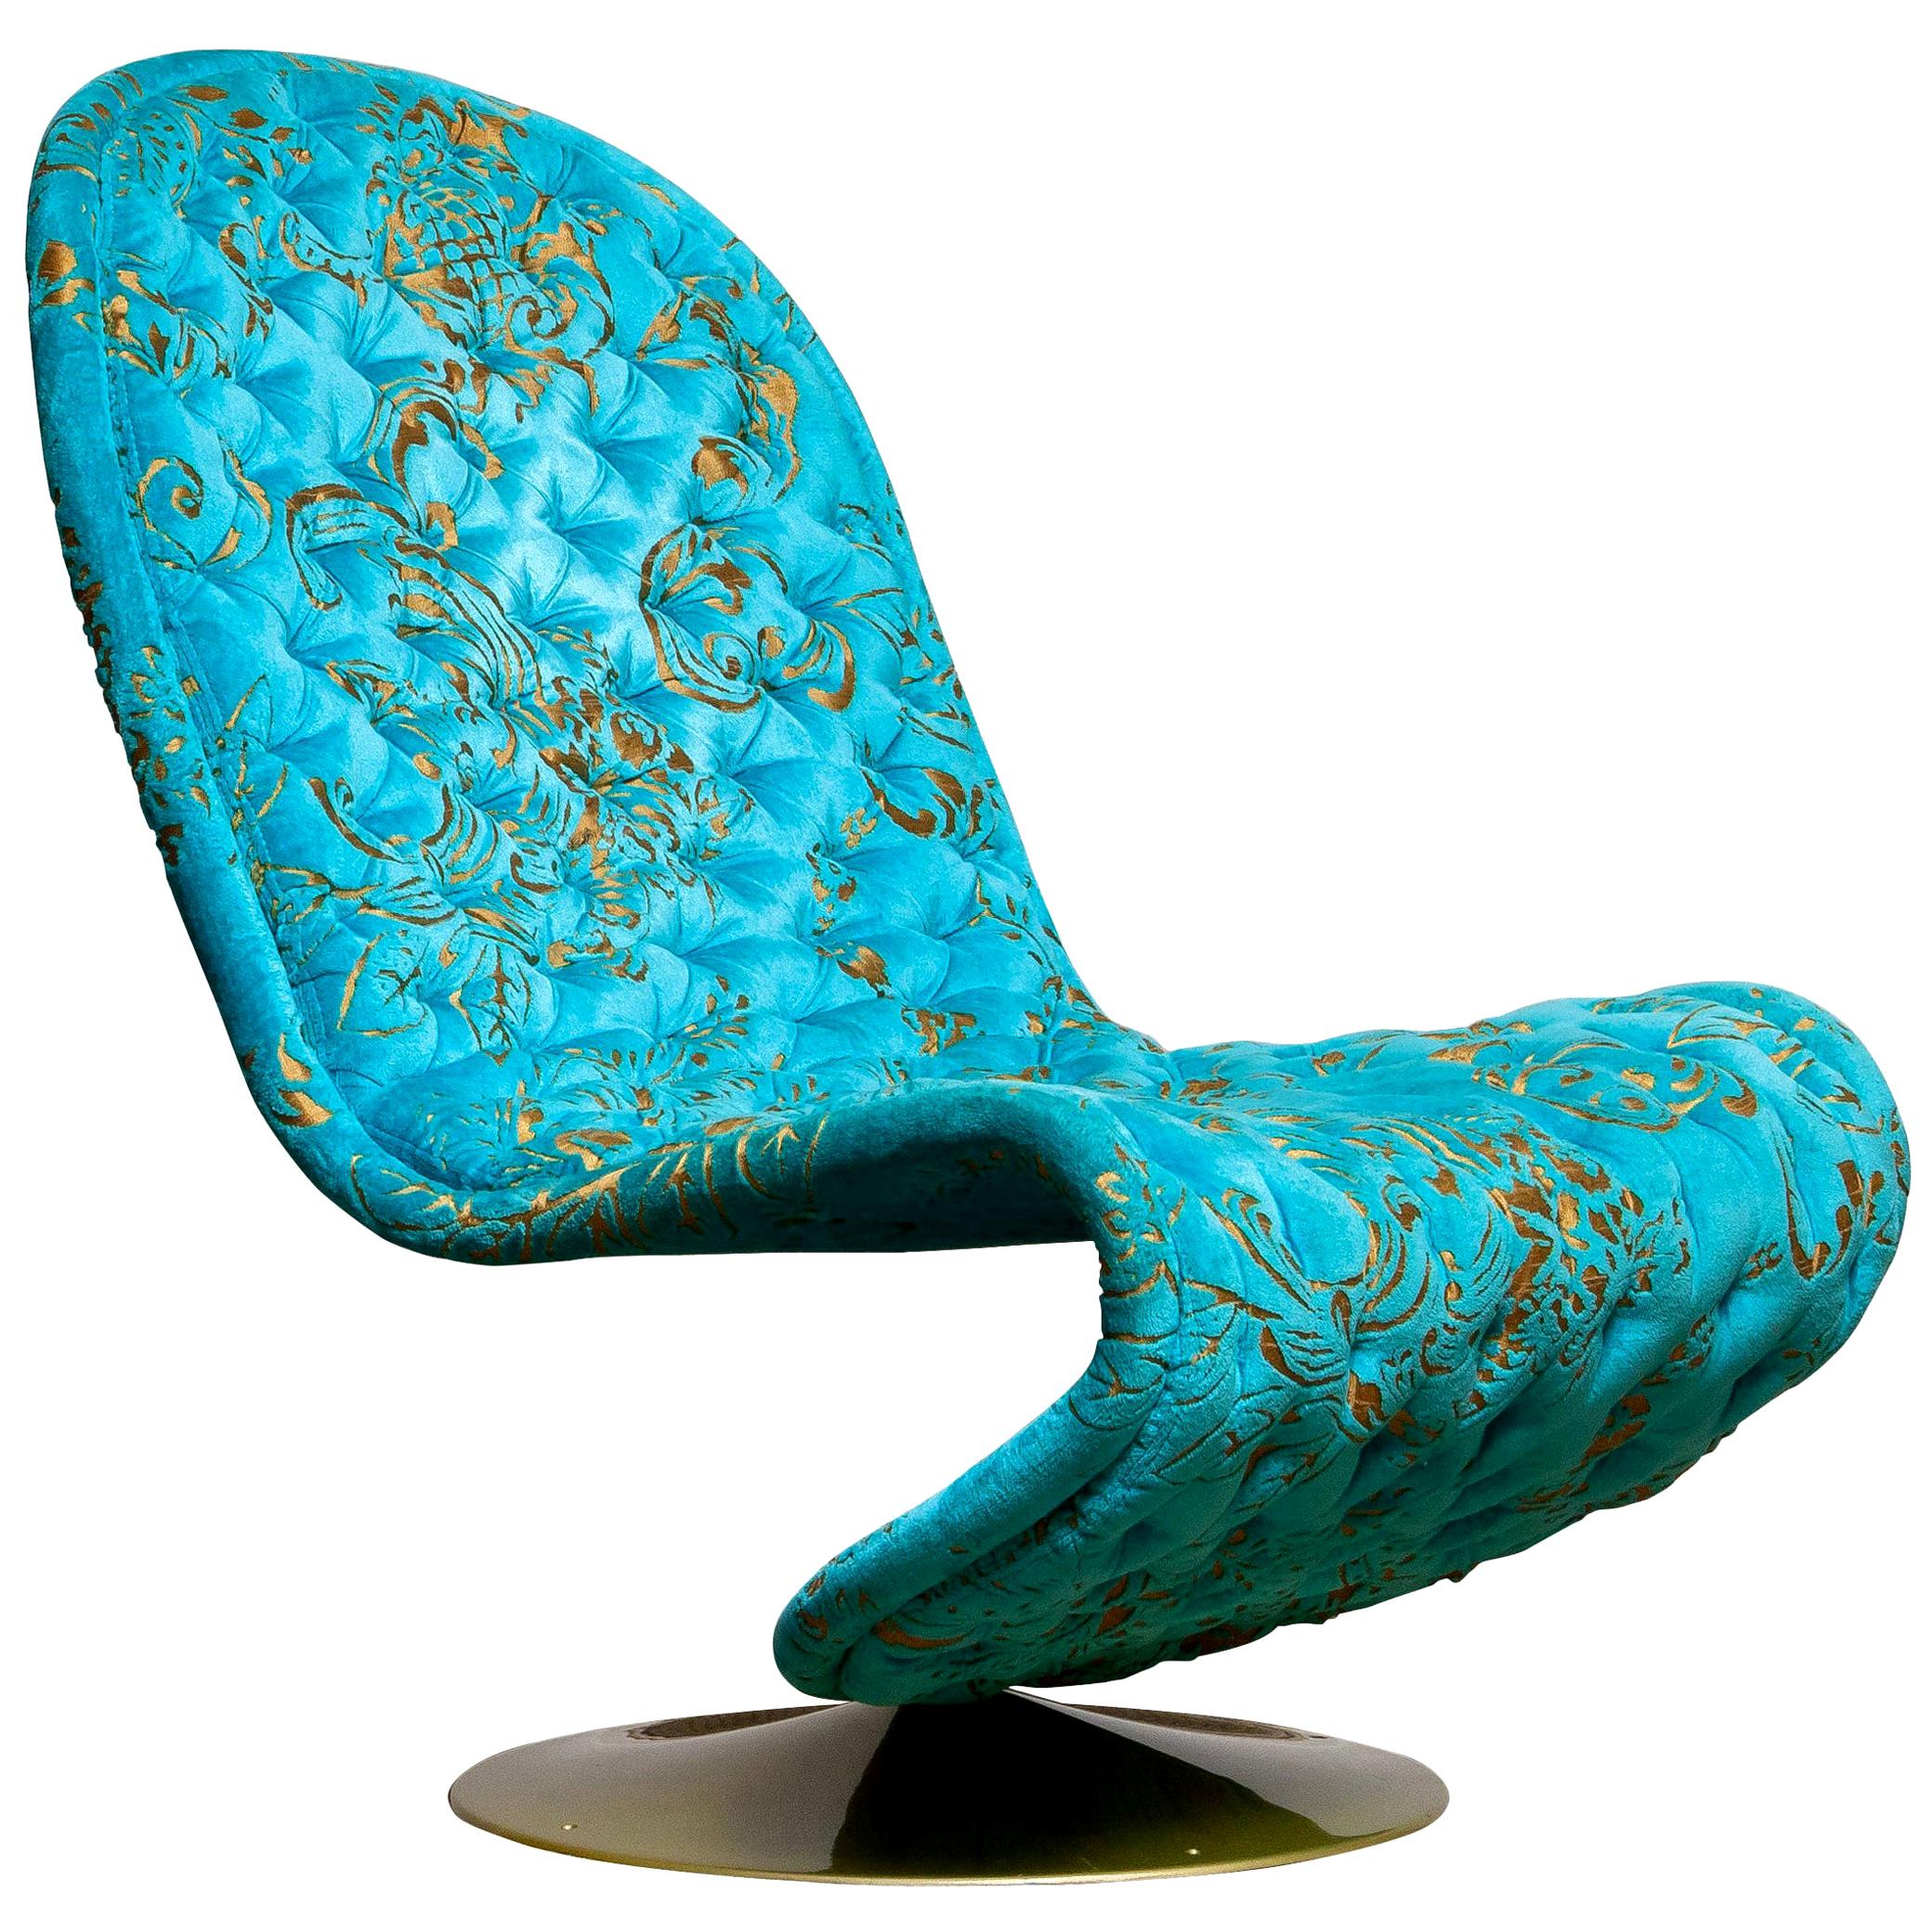 Beautiful 'system 123' de Luxe easy or lounge chair designed by Verner Panton in turquoise devoré / burnout / ausbrenner fabric.
The base is gold sprayed (high gloss) aluminum.
The overall condition is very good!